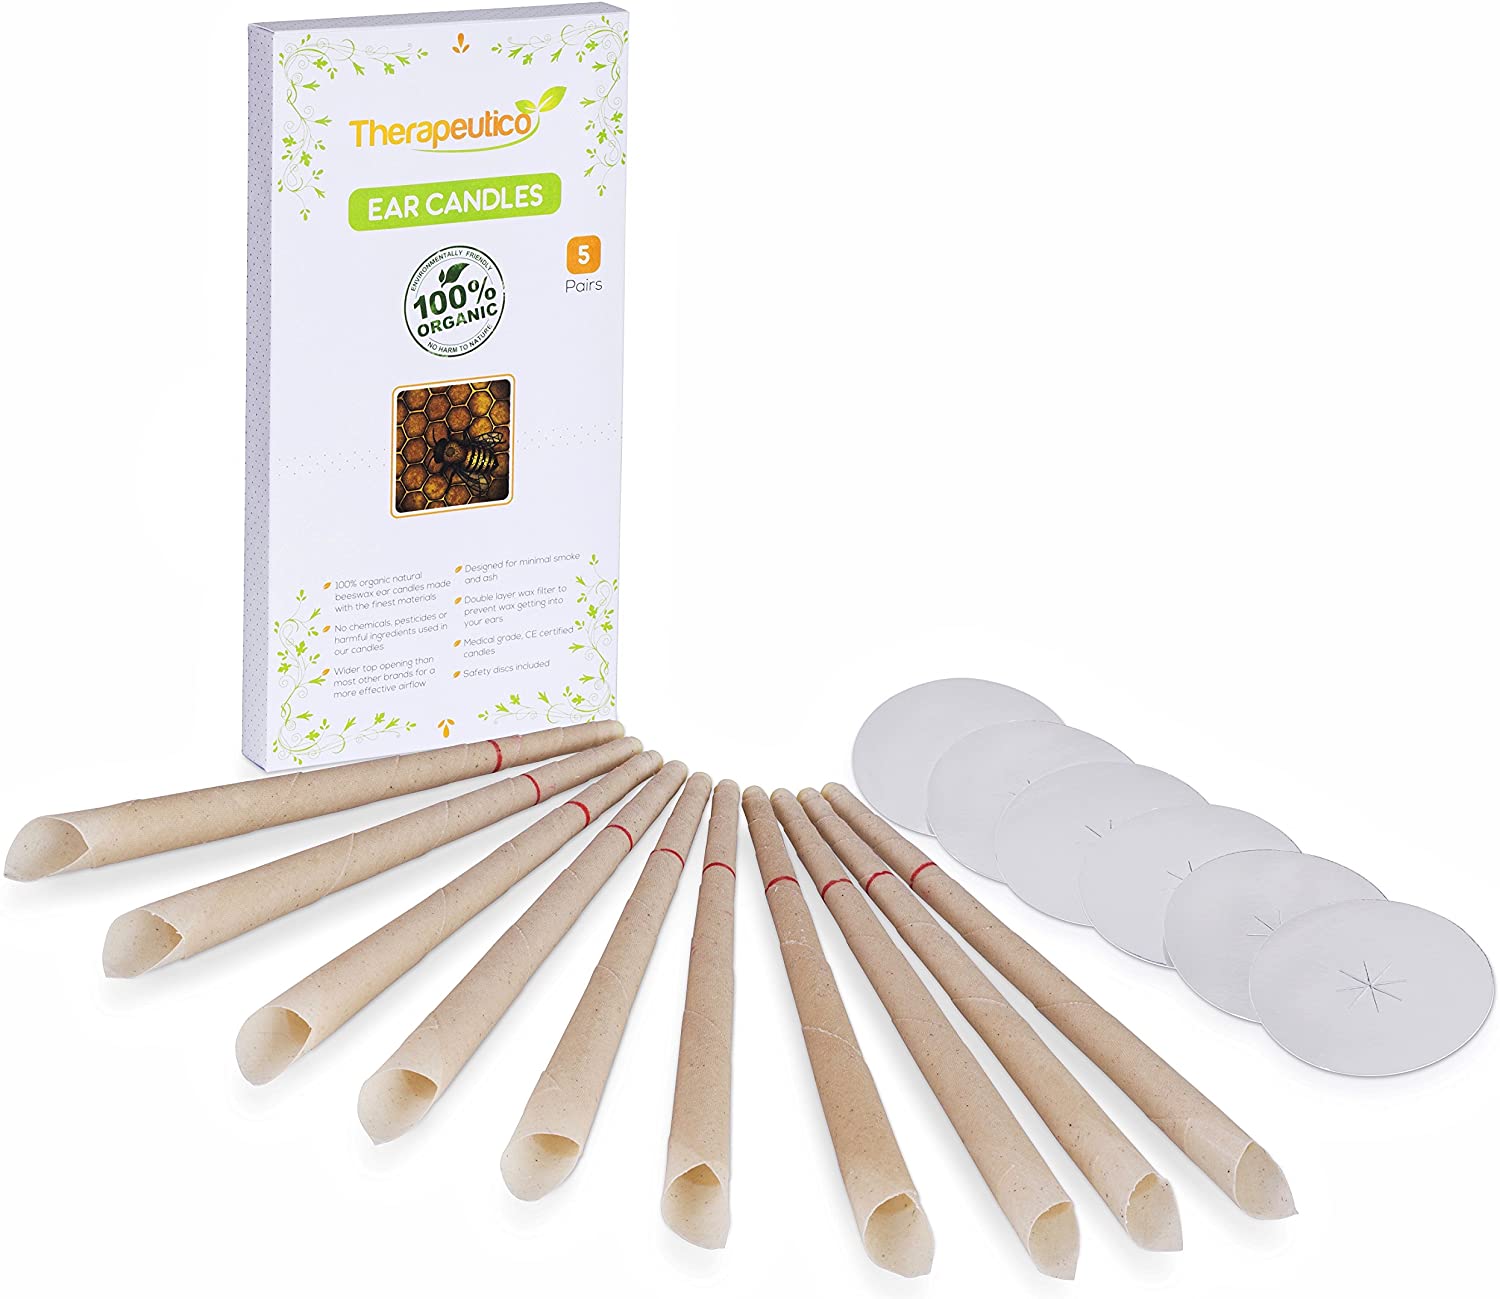 Therapeutico Natural Organic 100% Beeswax Hopi Ear Candles with